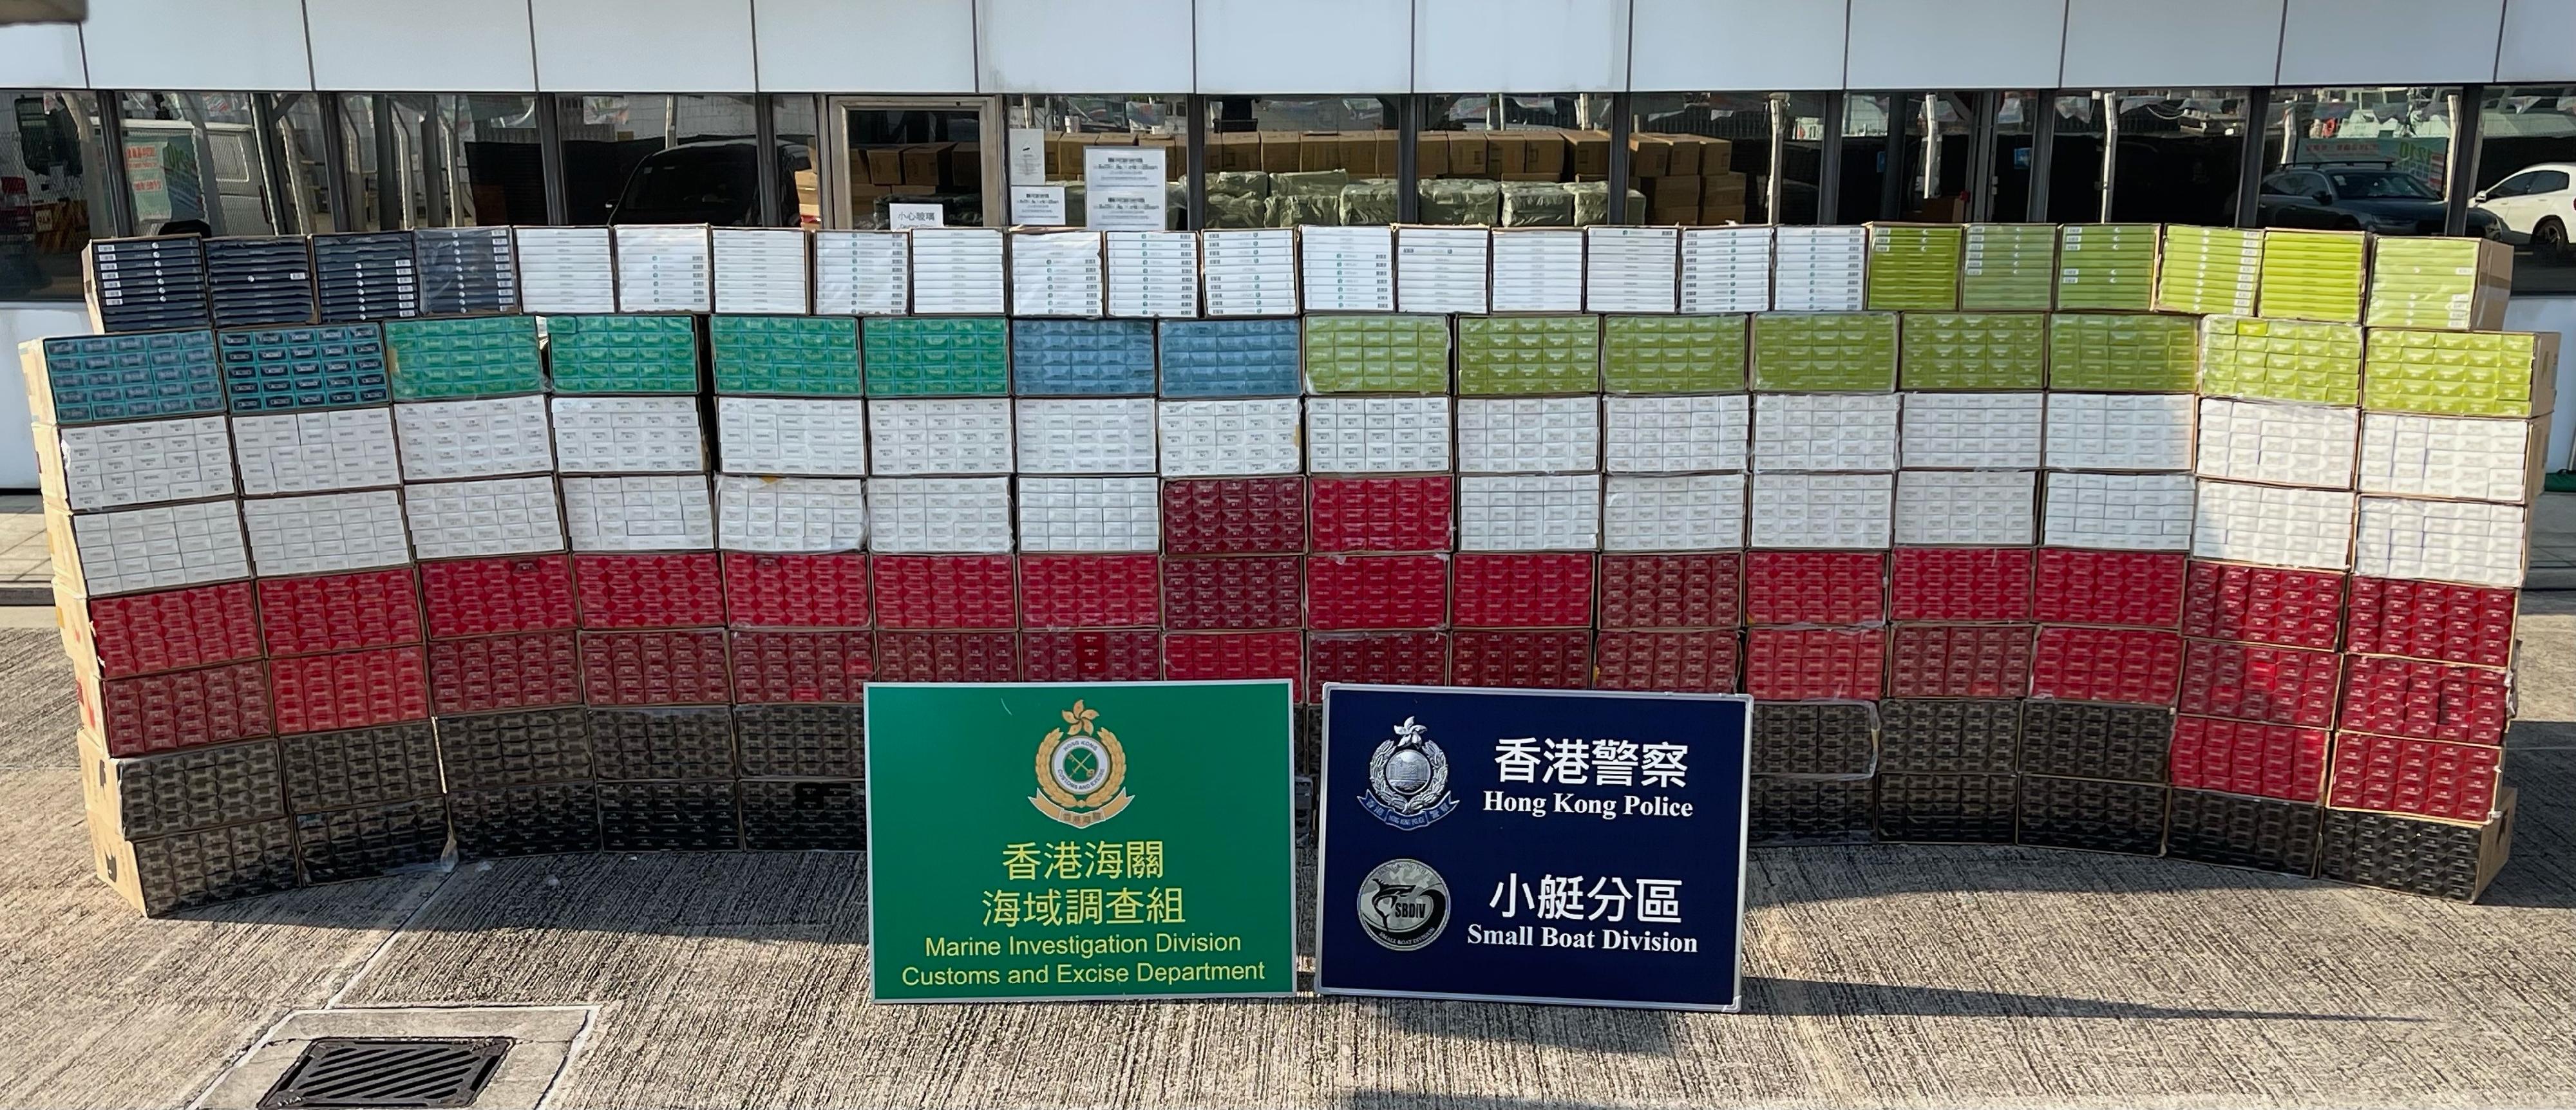 Hong Kong Customs and the Marine Police conducted a joint operation yesterday (November 23) in the waters near Lantau Island and seized about 2.9 million sticks of suspected illicit cigarettes with an estimated market value of about $10.73 million and a duty potential of about $7.25 million. Photo shows the suspected illicit cigarettes seized.

